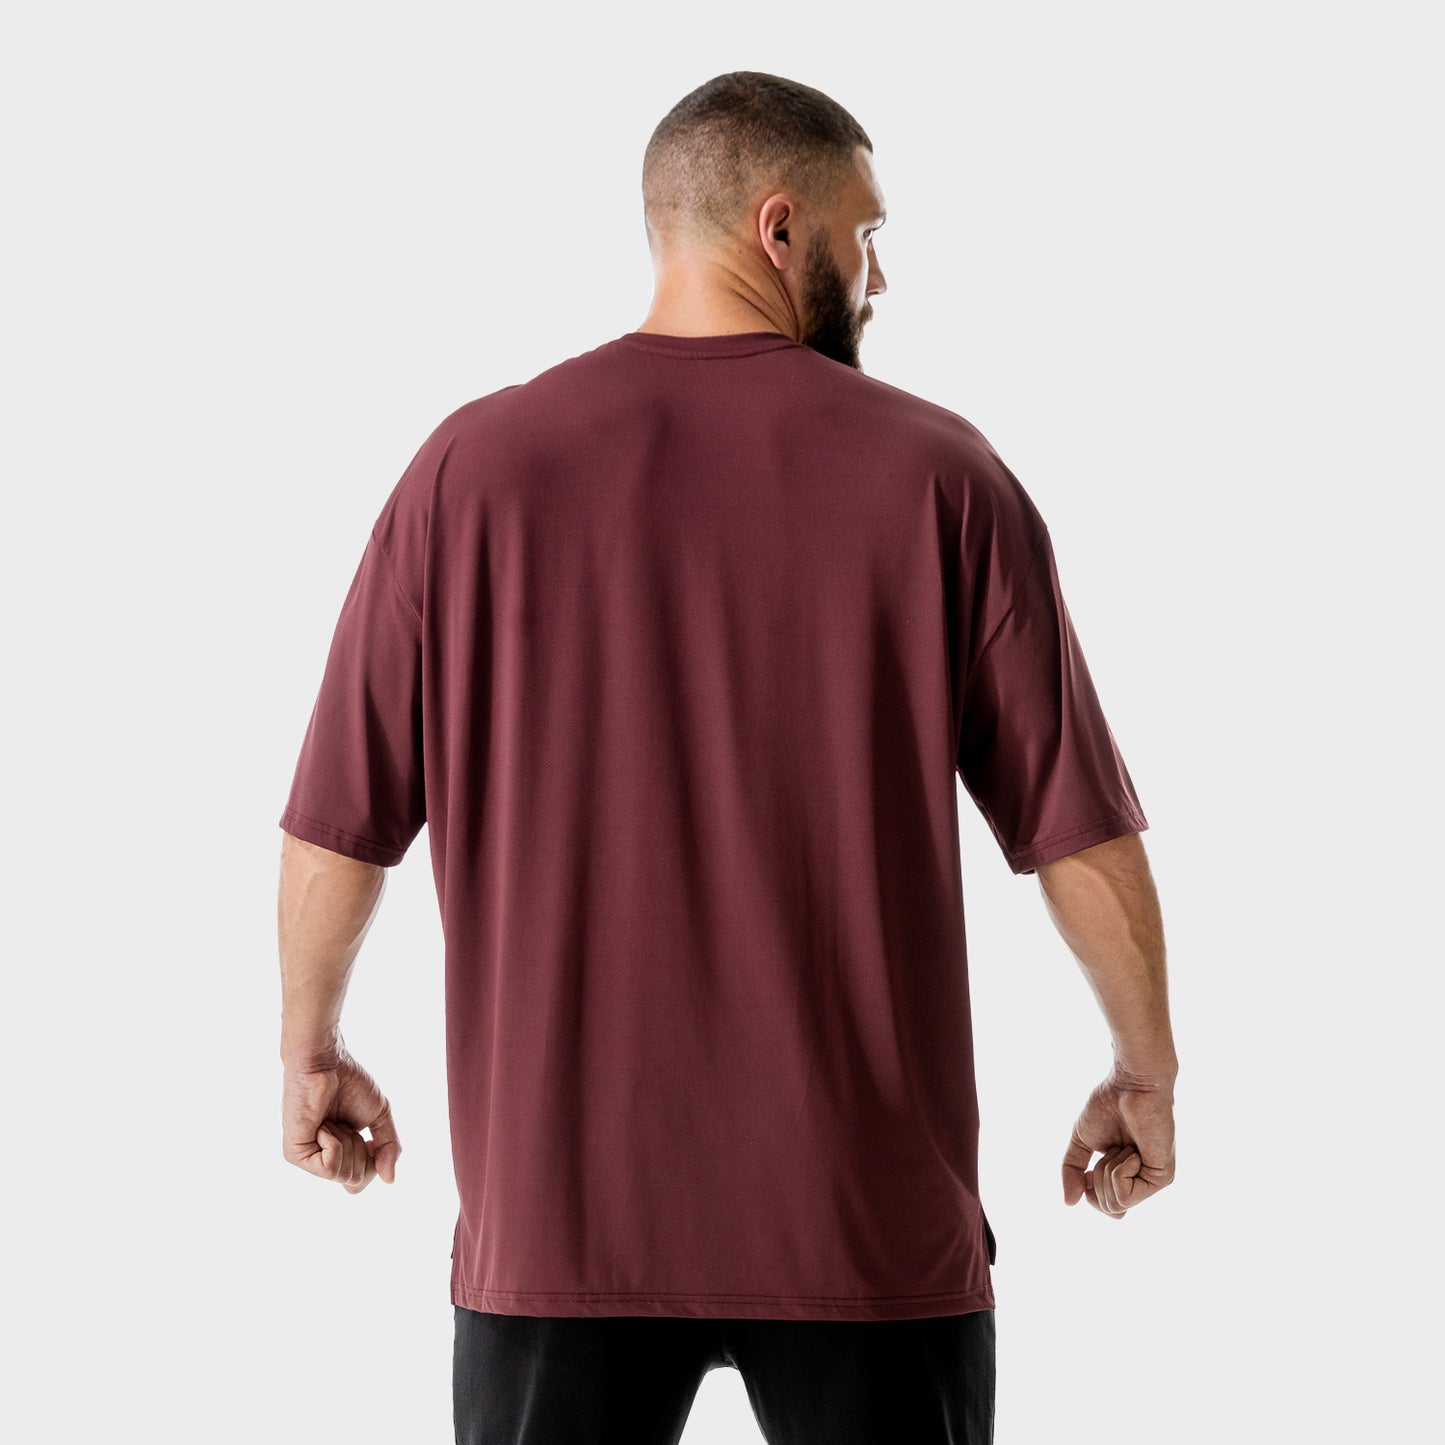 squatwolf-gym-wear-lab-360-oversized-tee-maroon-workout-shirts-for-men